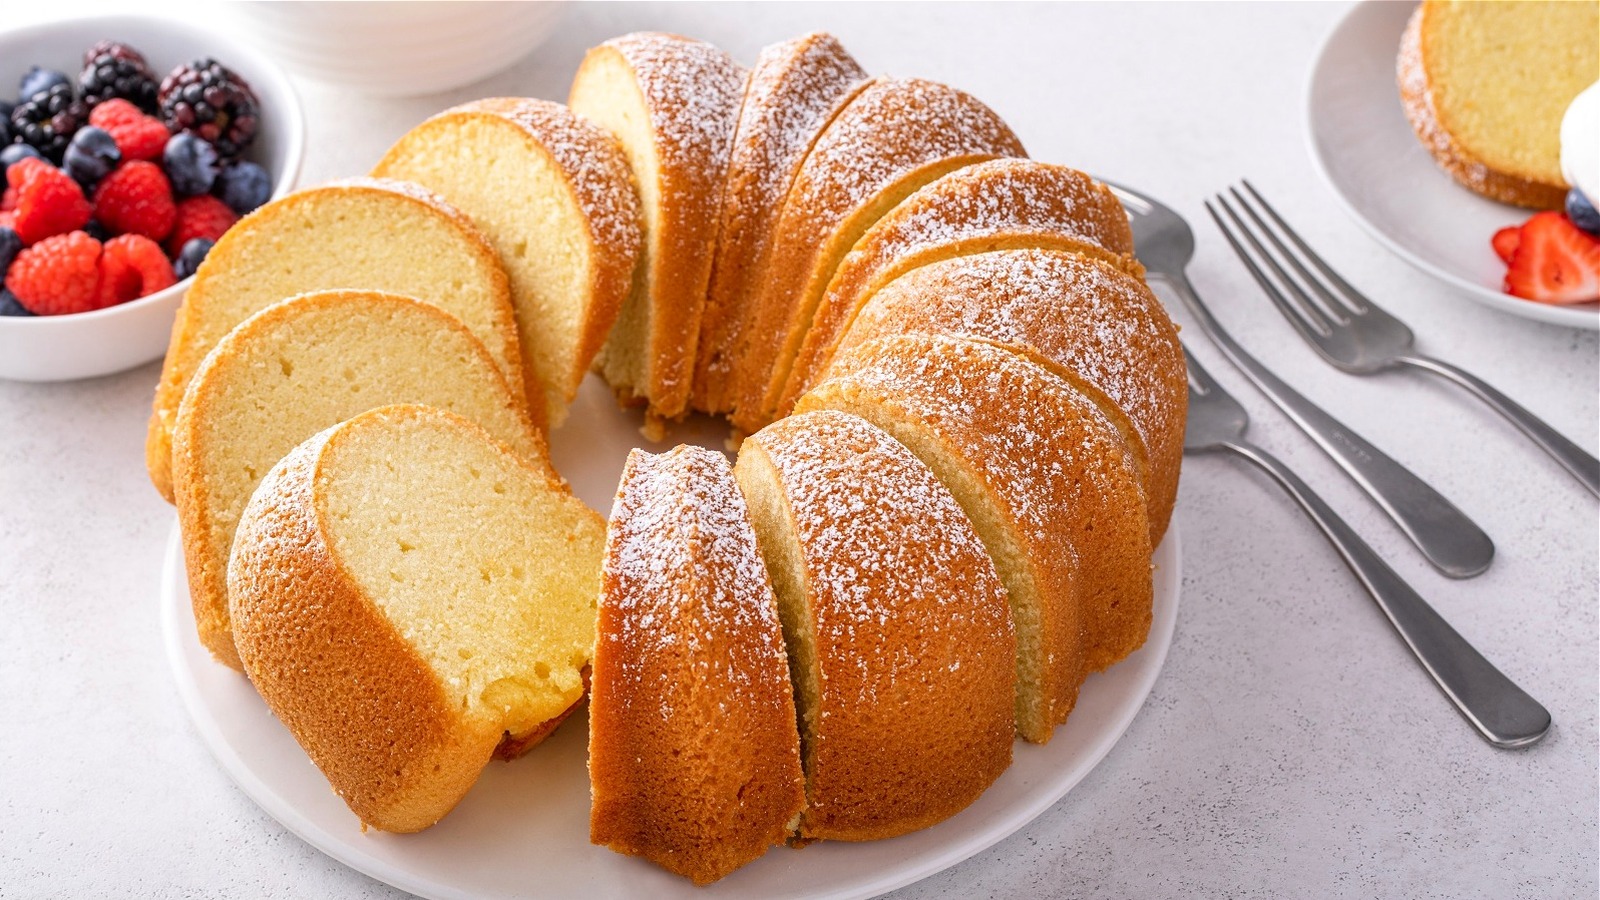 Here's How Pound Cake Got Its Name - Daily Meal